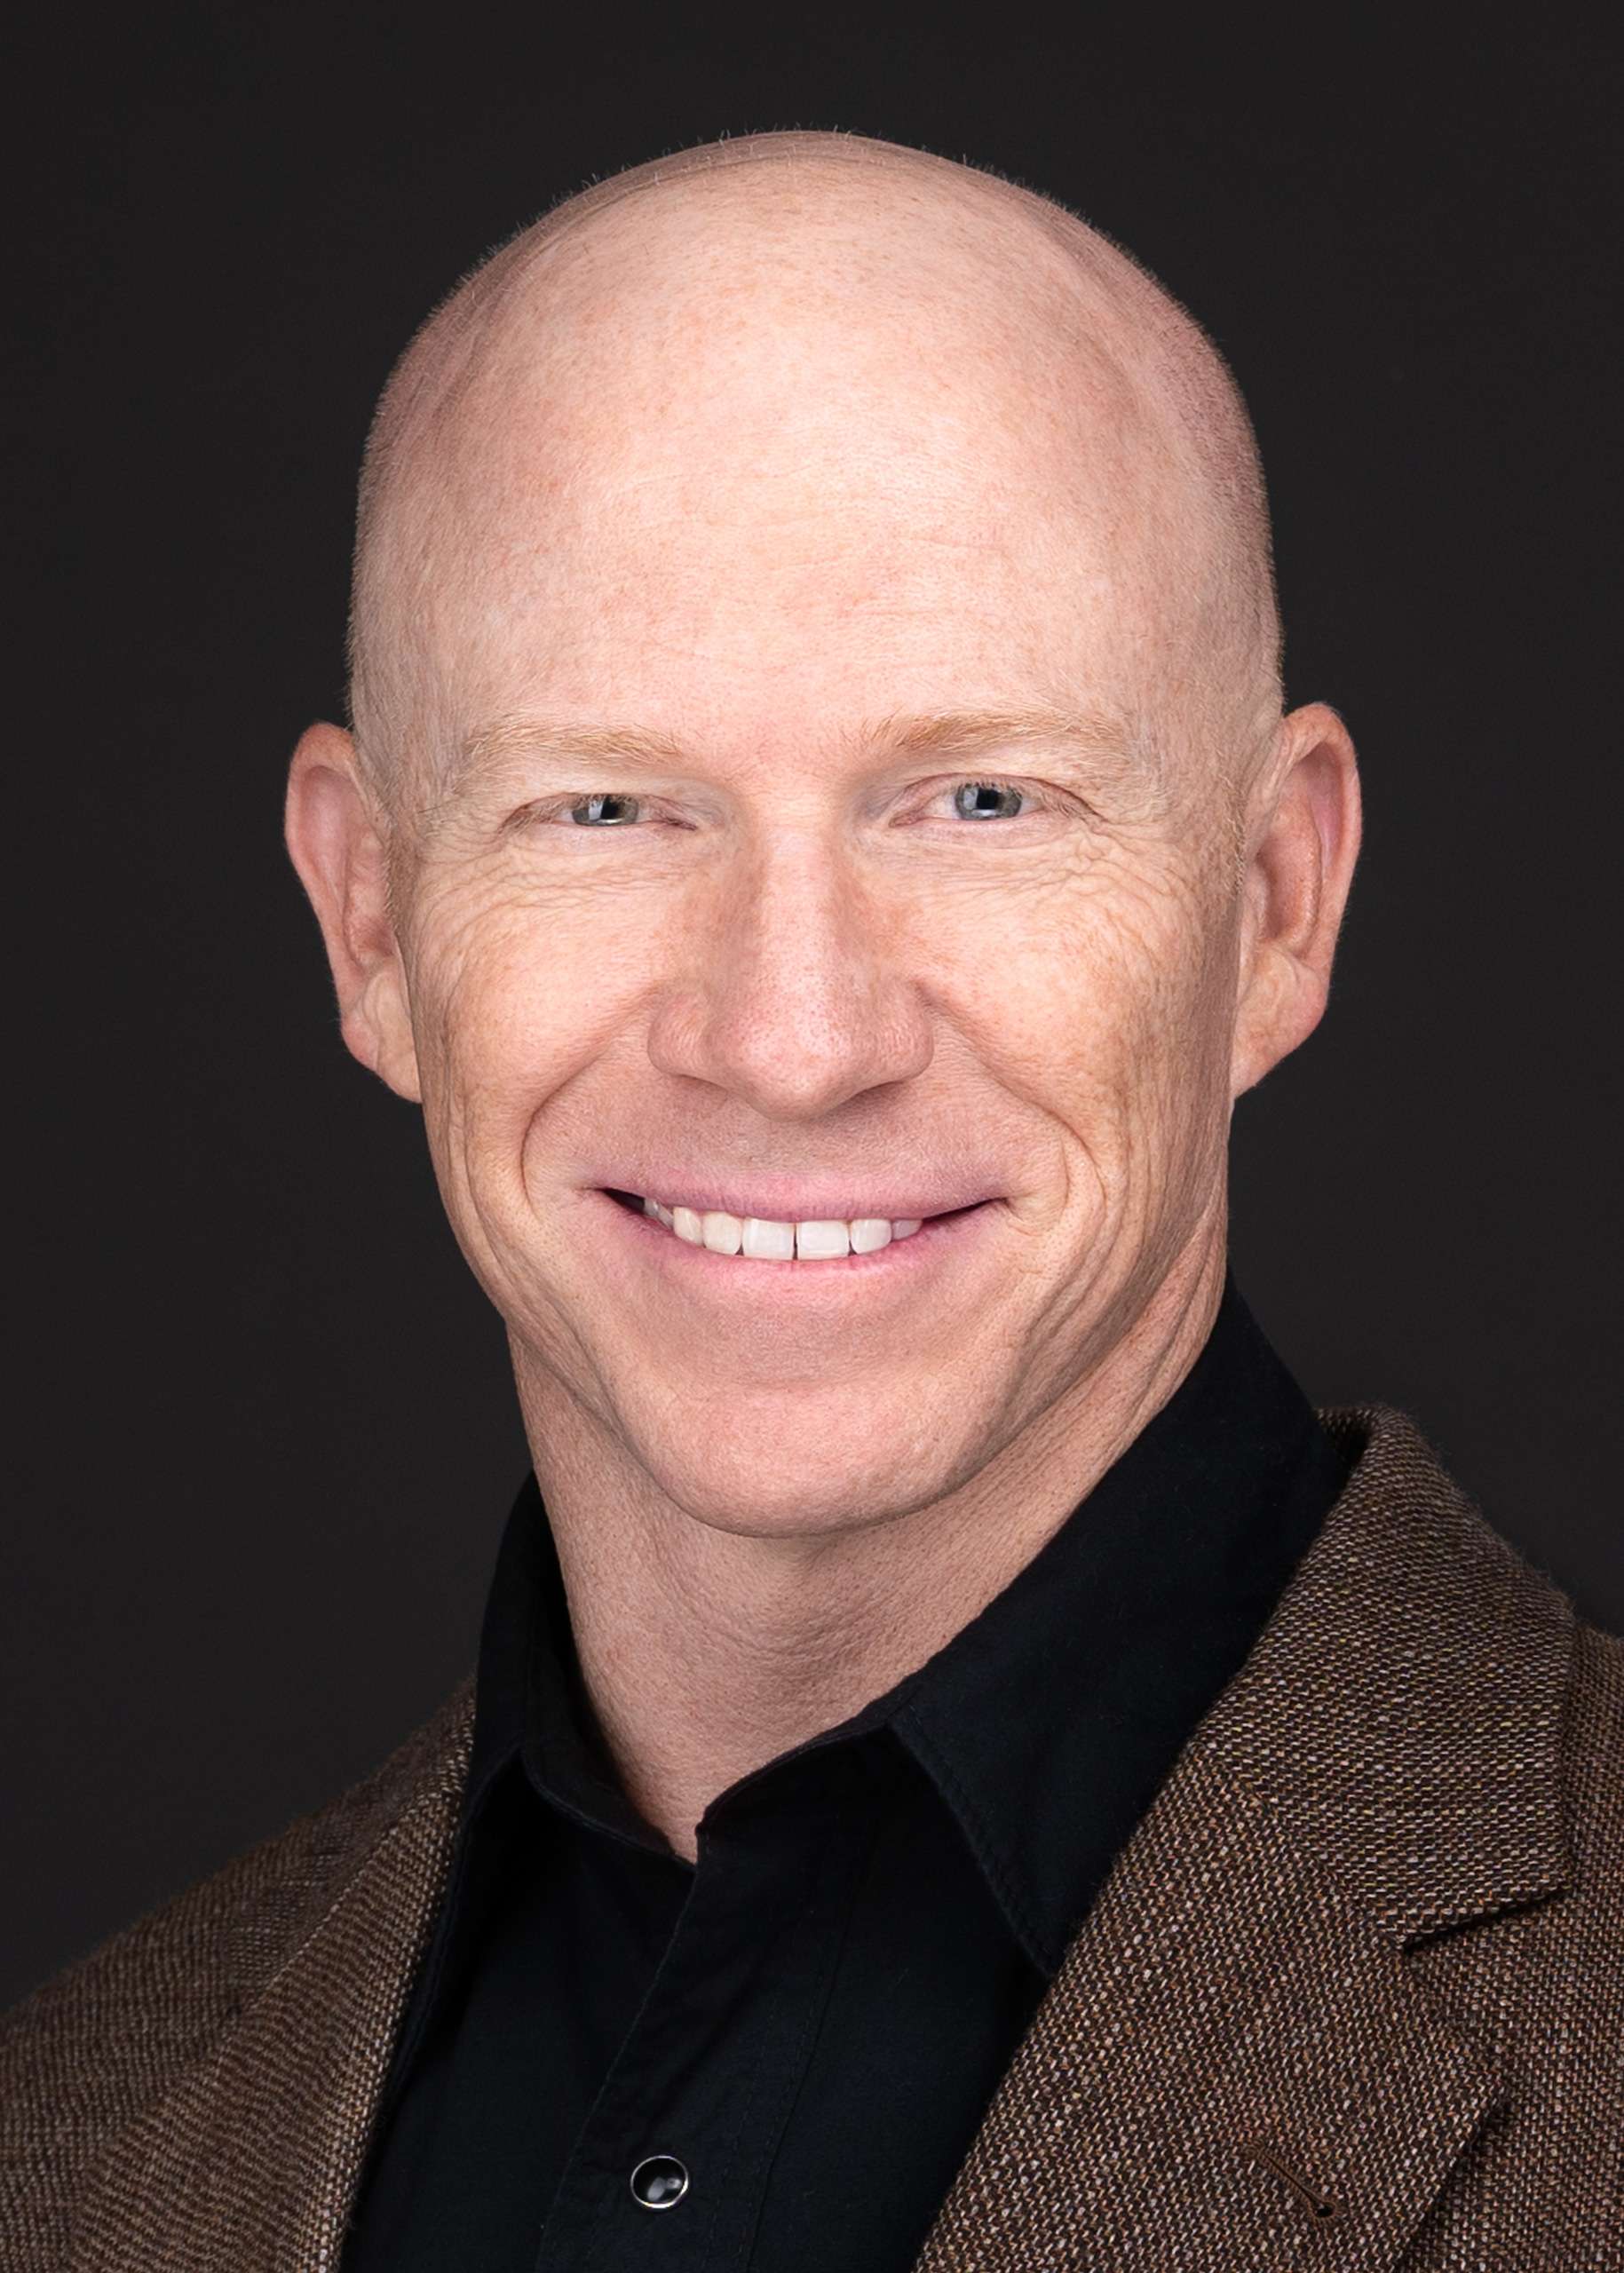 A bald man with a genuine smile poses for a business headshot captured by Sarah Anne Wilson Photography in Cary, North Carolina.